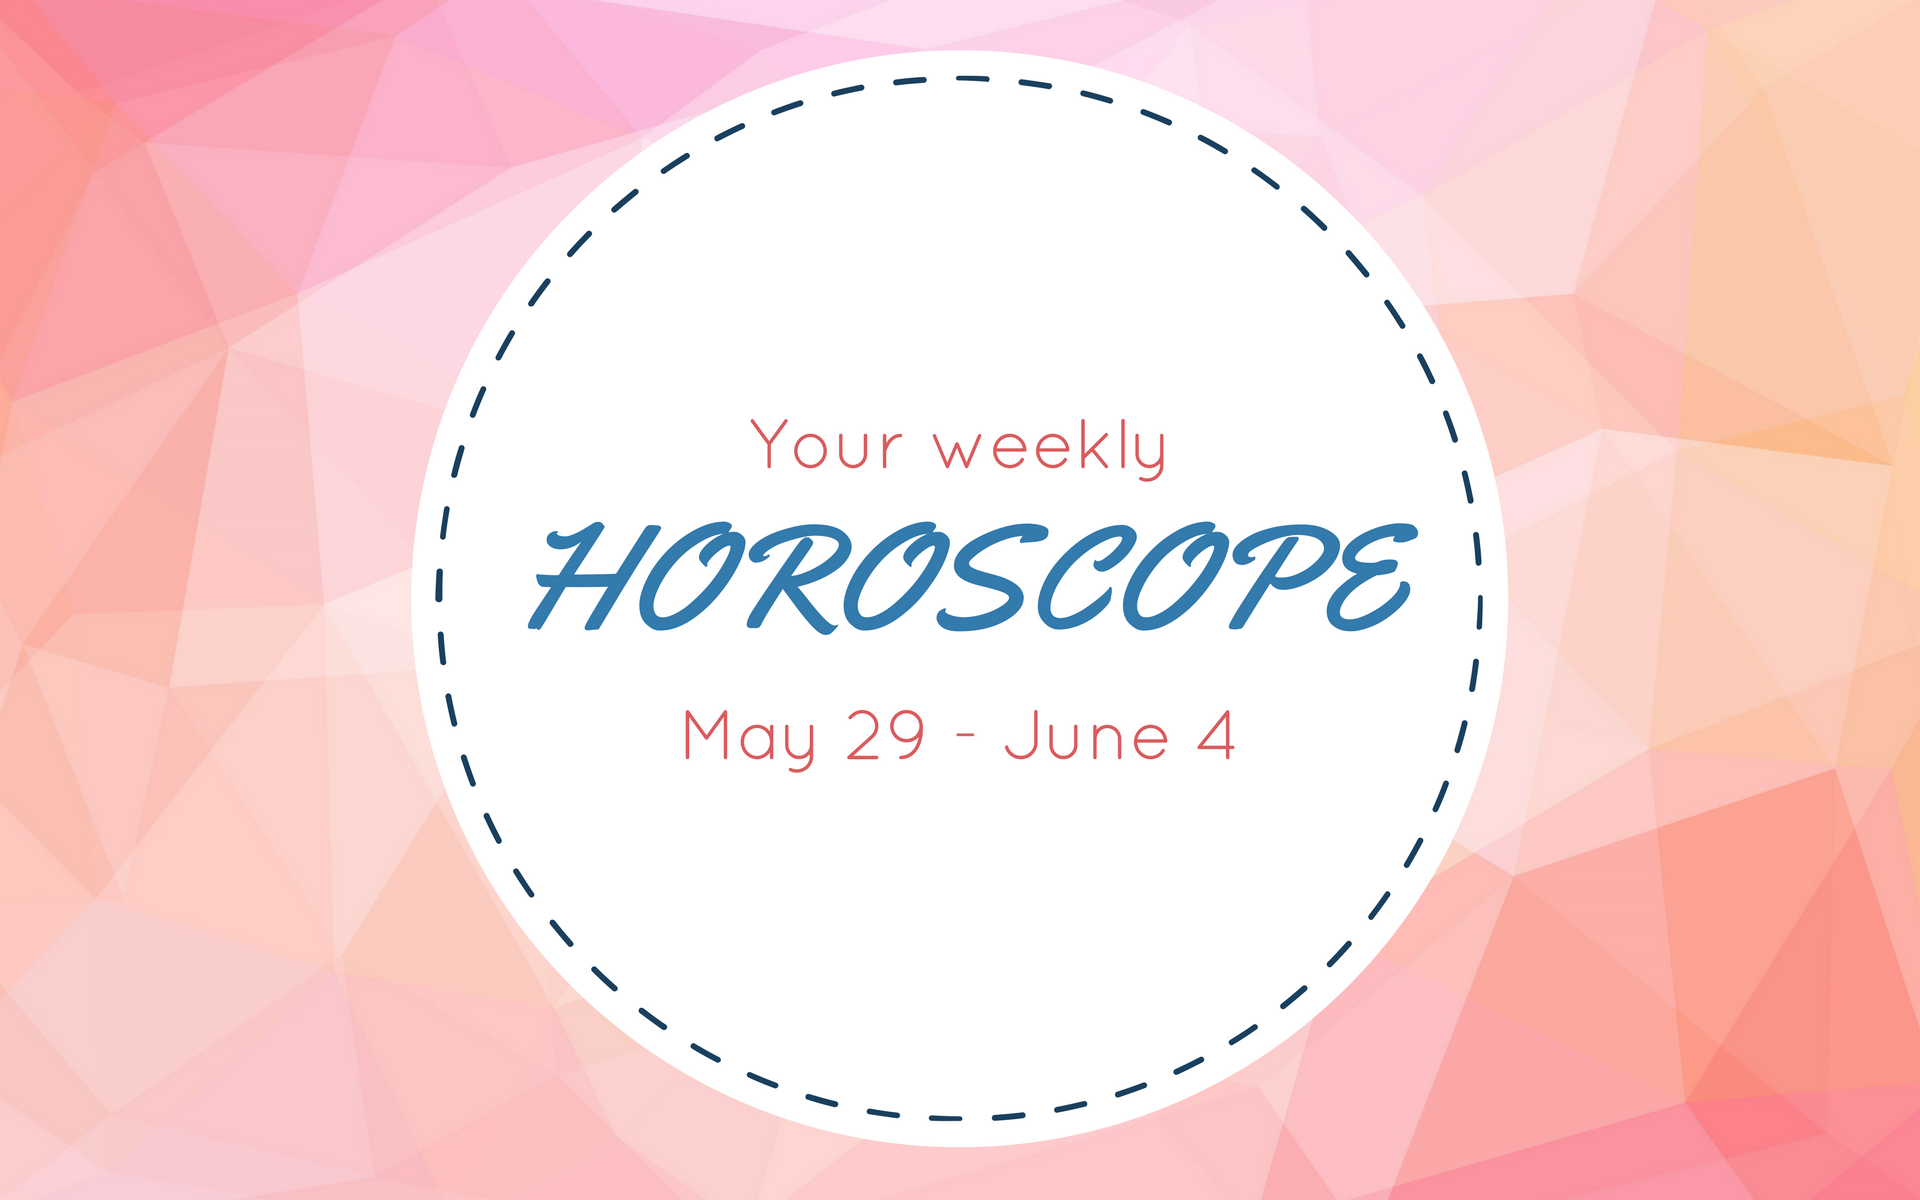 Your Weekly Horoscope: May 29 - June 4